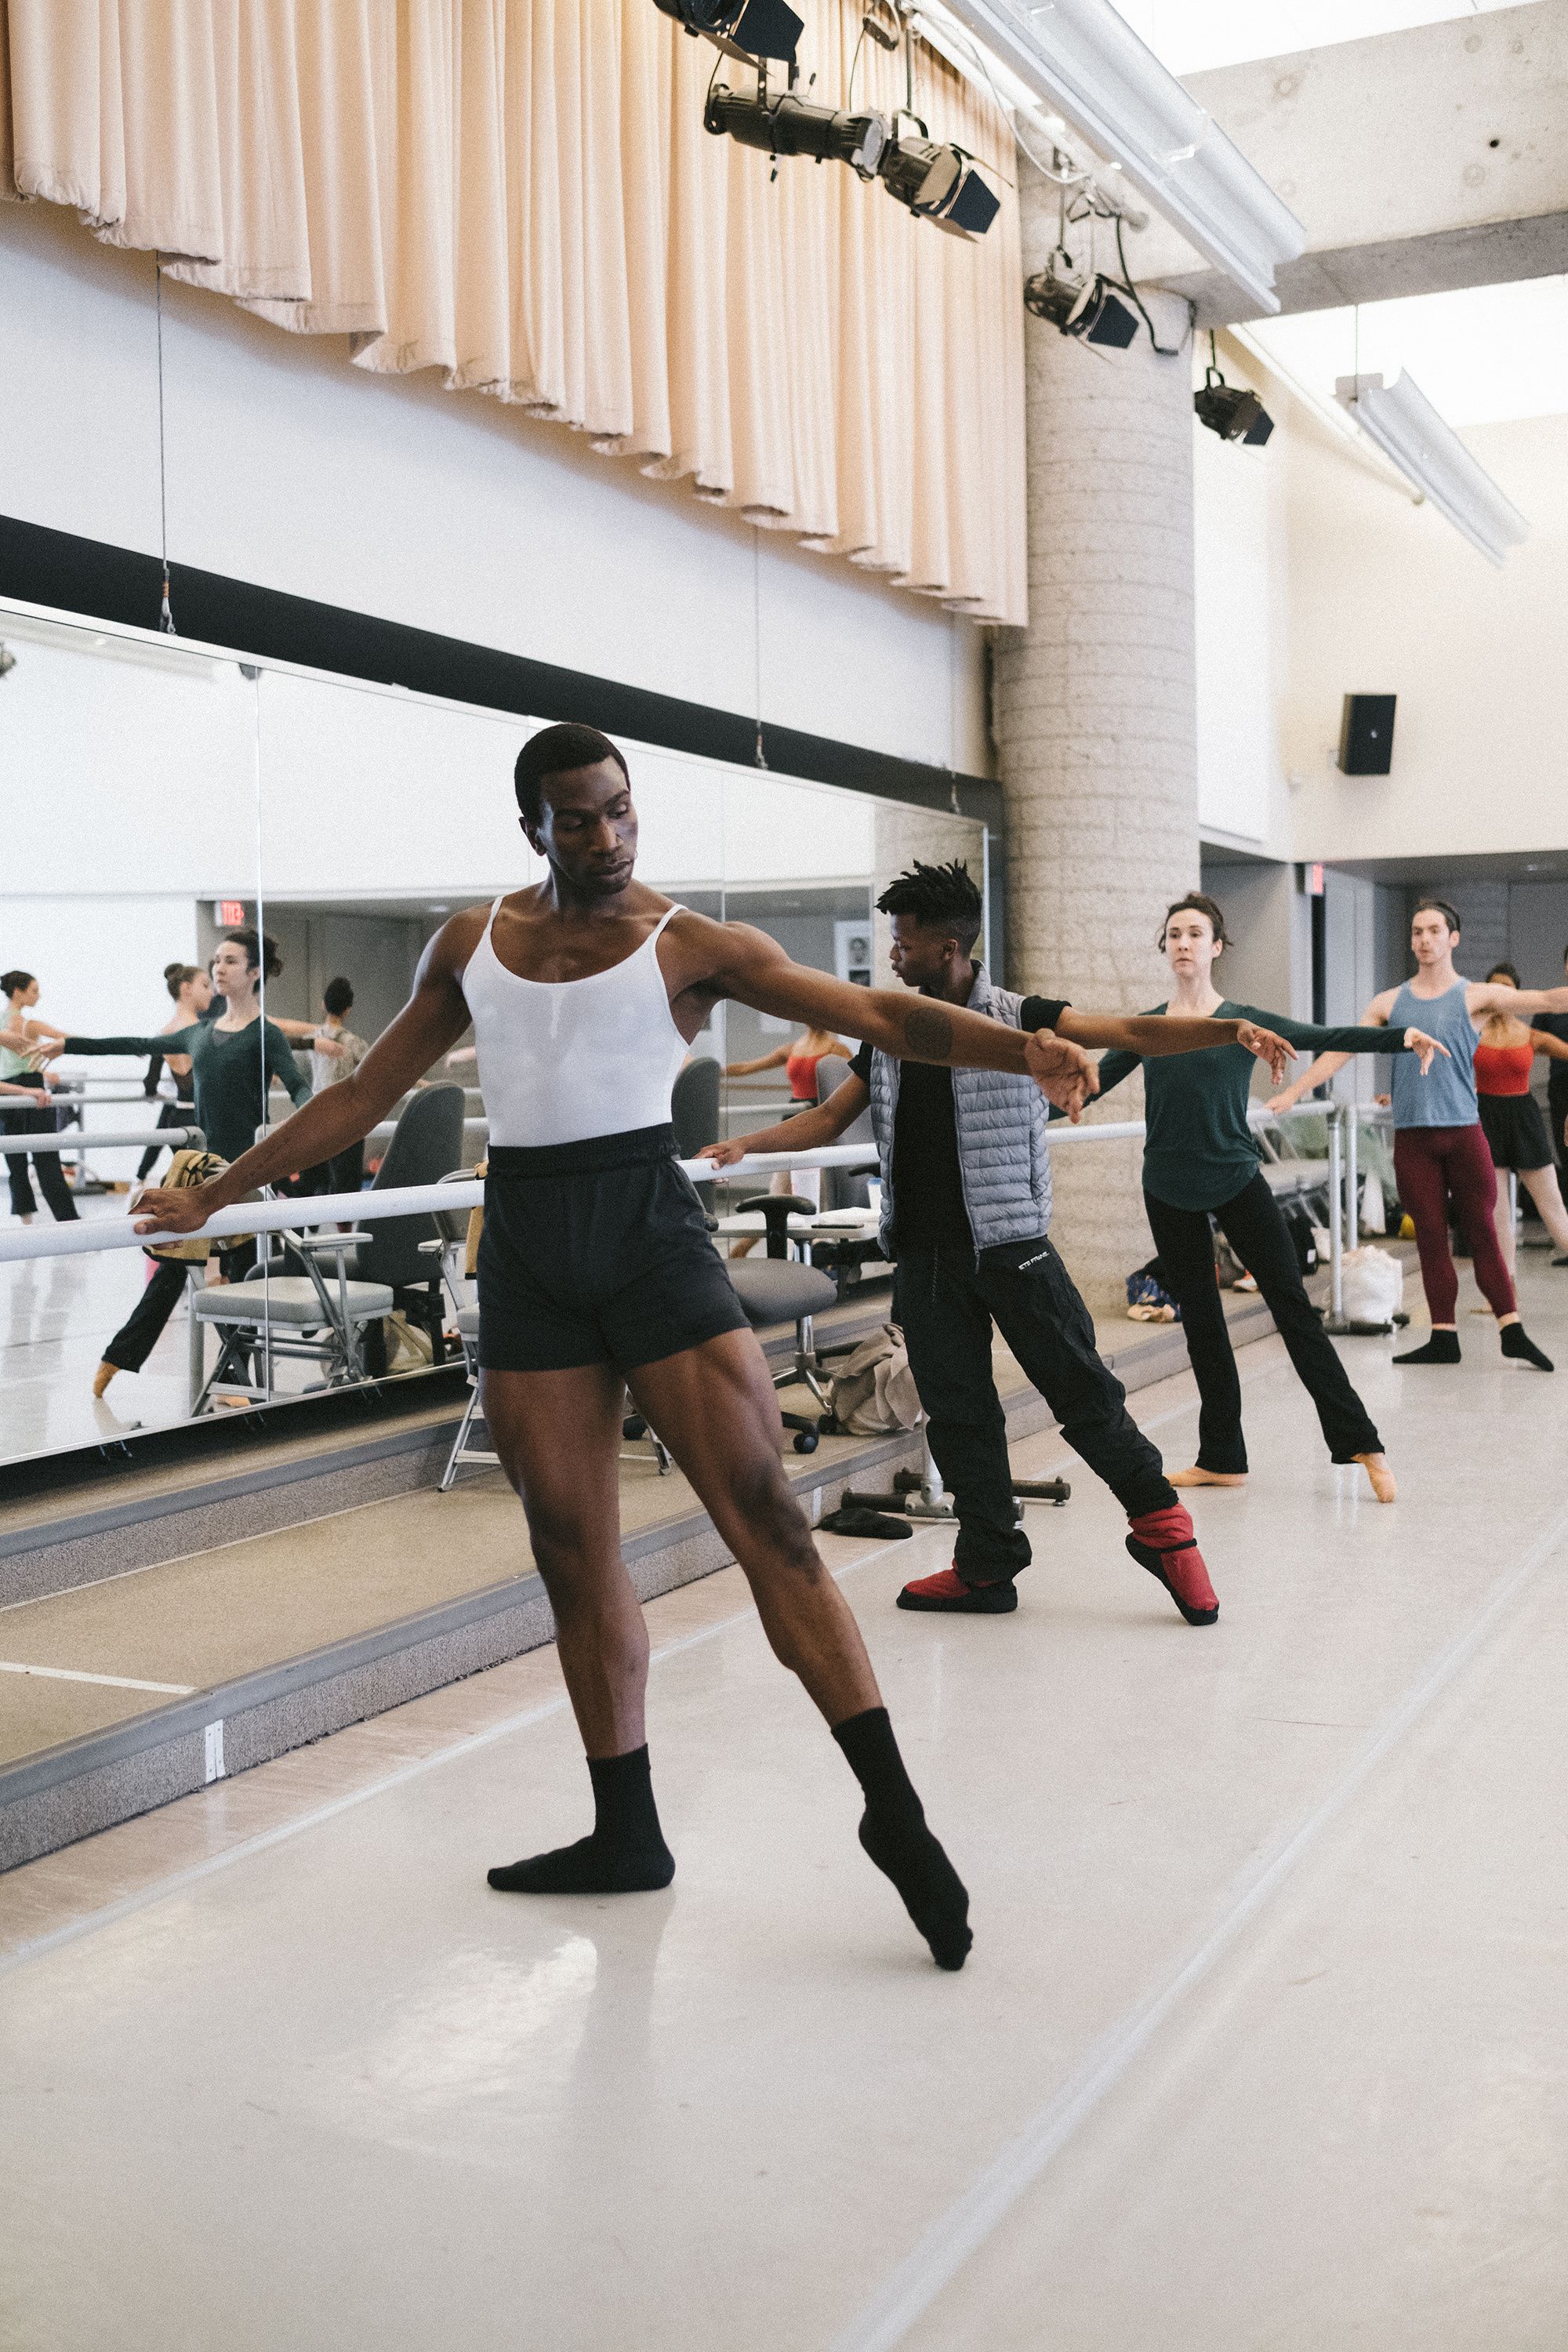 After Being Called Out The National Ballet Of Canada Increases Its Diversity Efforts Dance Magazine